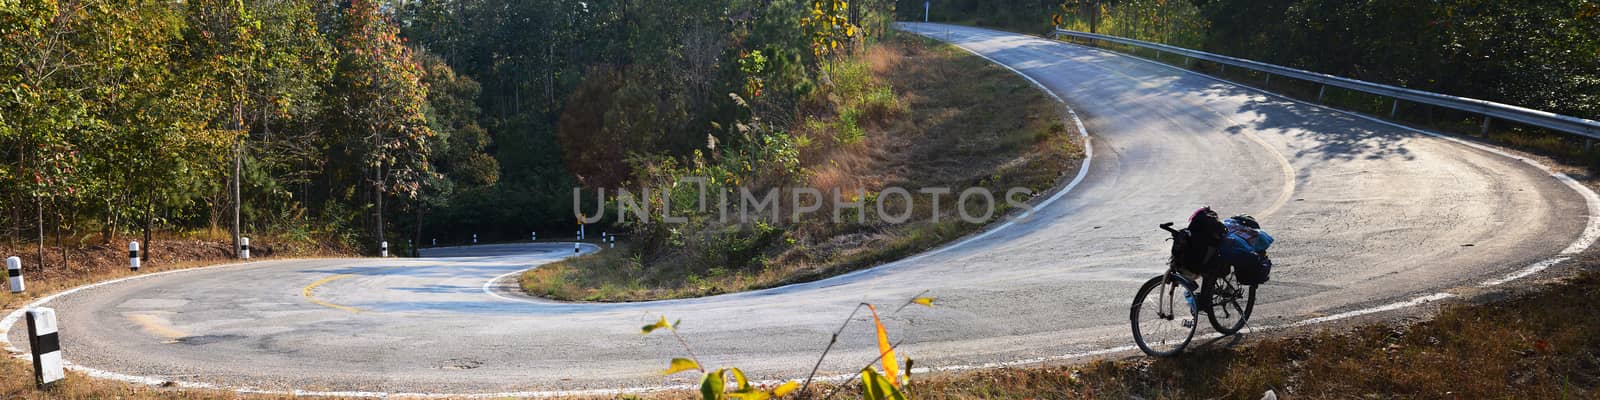 Bicycle on Slope Down Hill Country Asphalt Road no Autocar, Pano by kobfujar